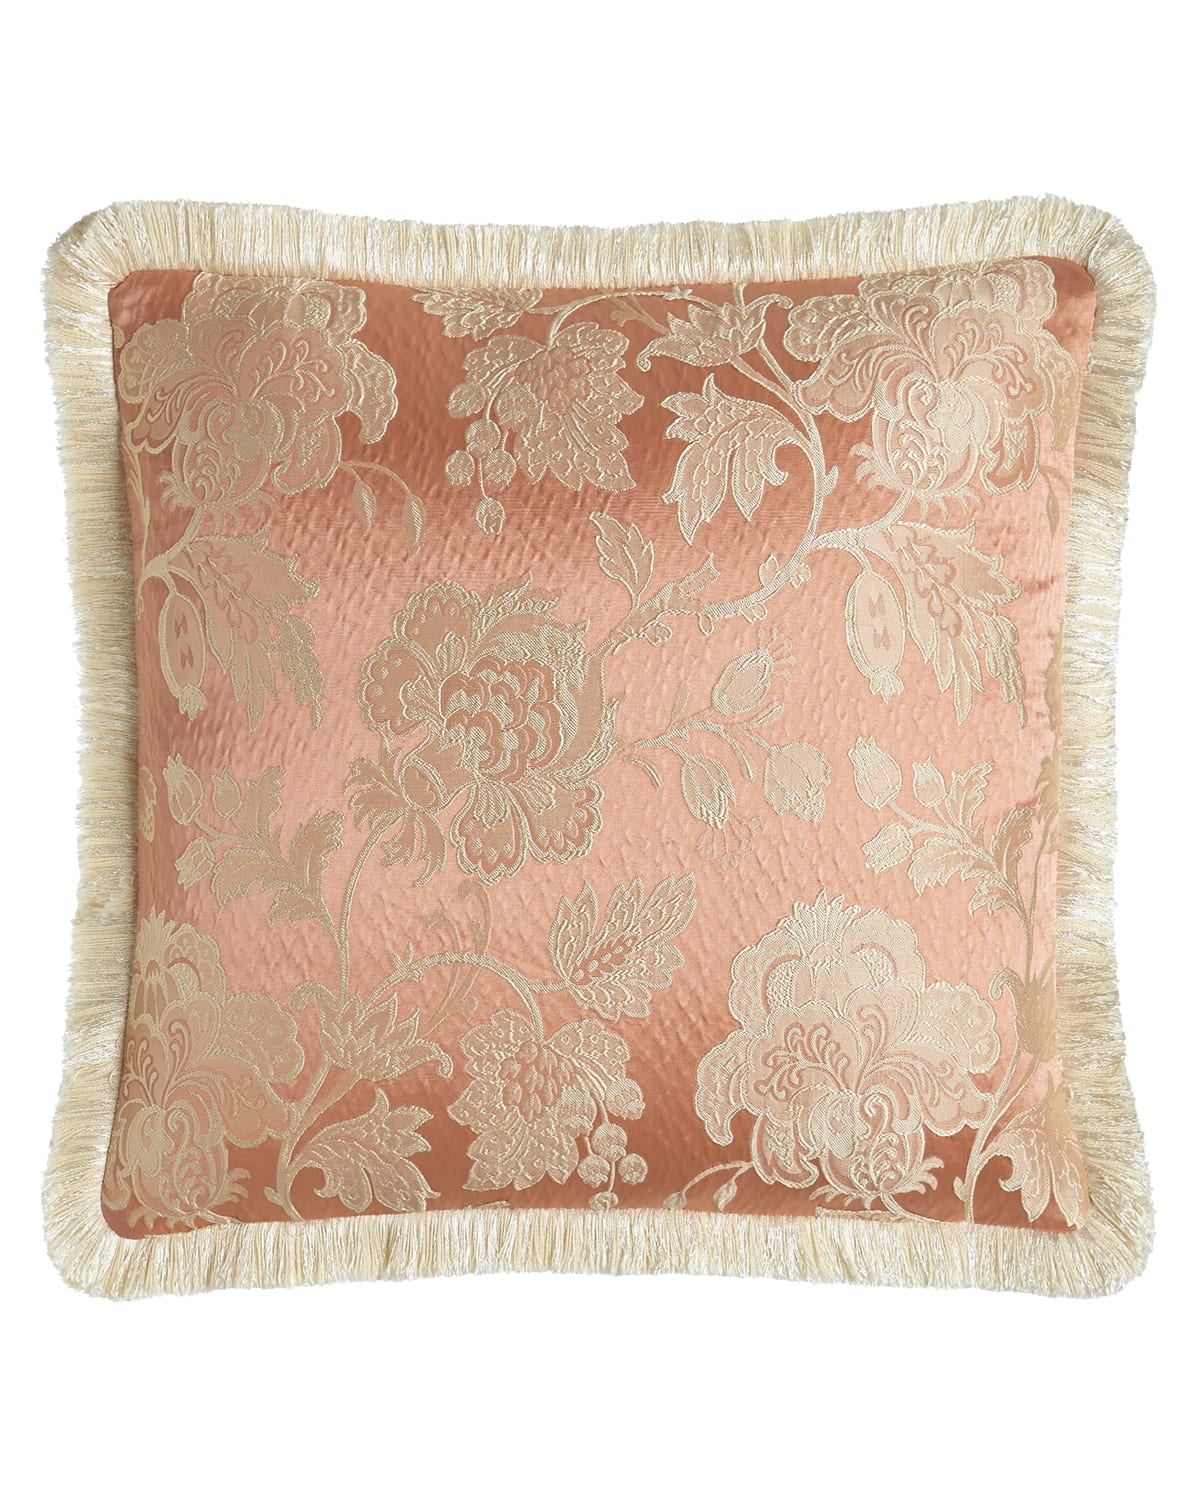 Image Austin Horn Collection Primrose Pillow with Fringe, 20"Sq.